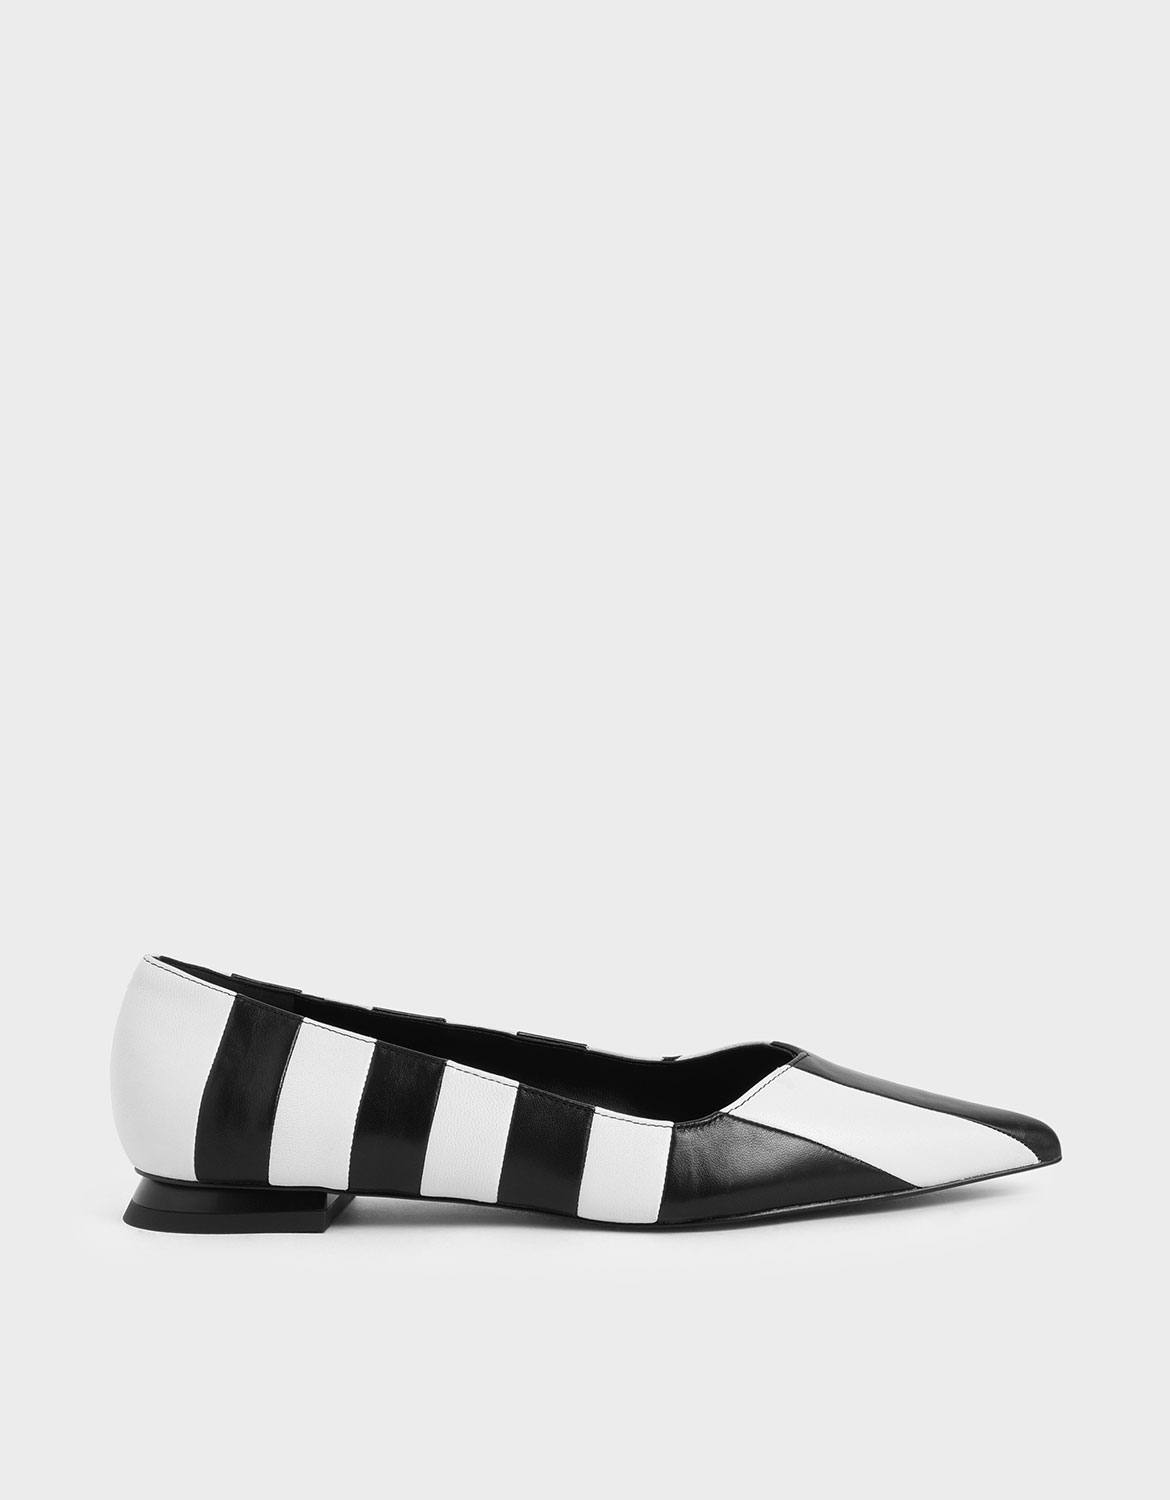 Two-Tone Leather Striped Ballerina Flats